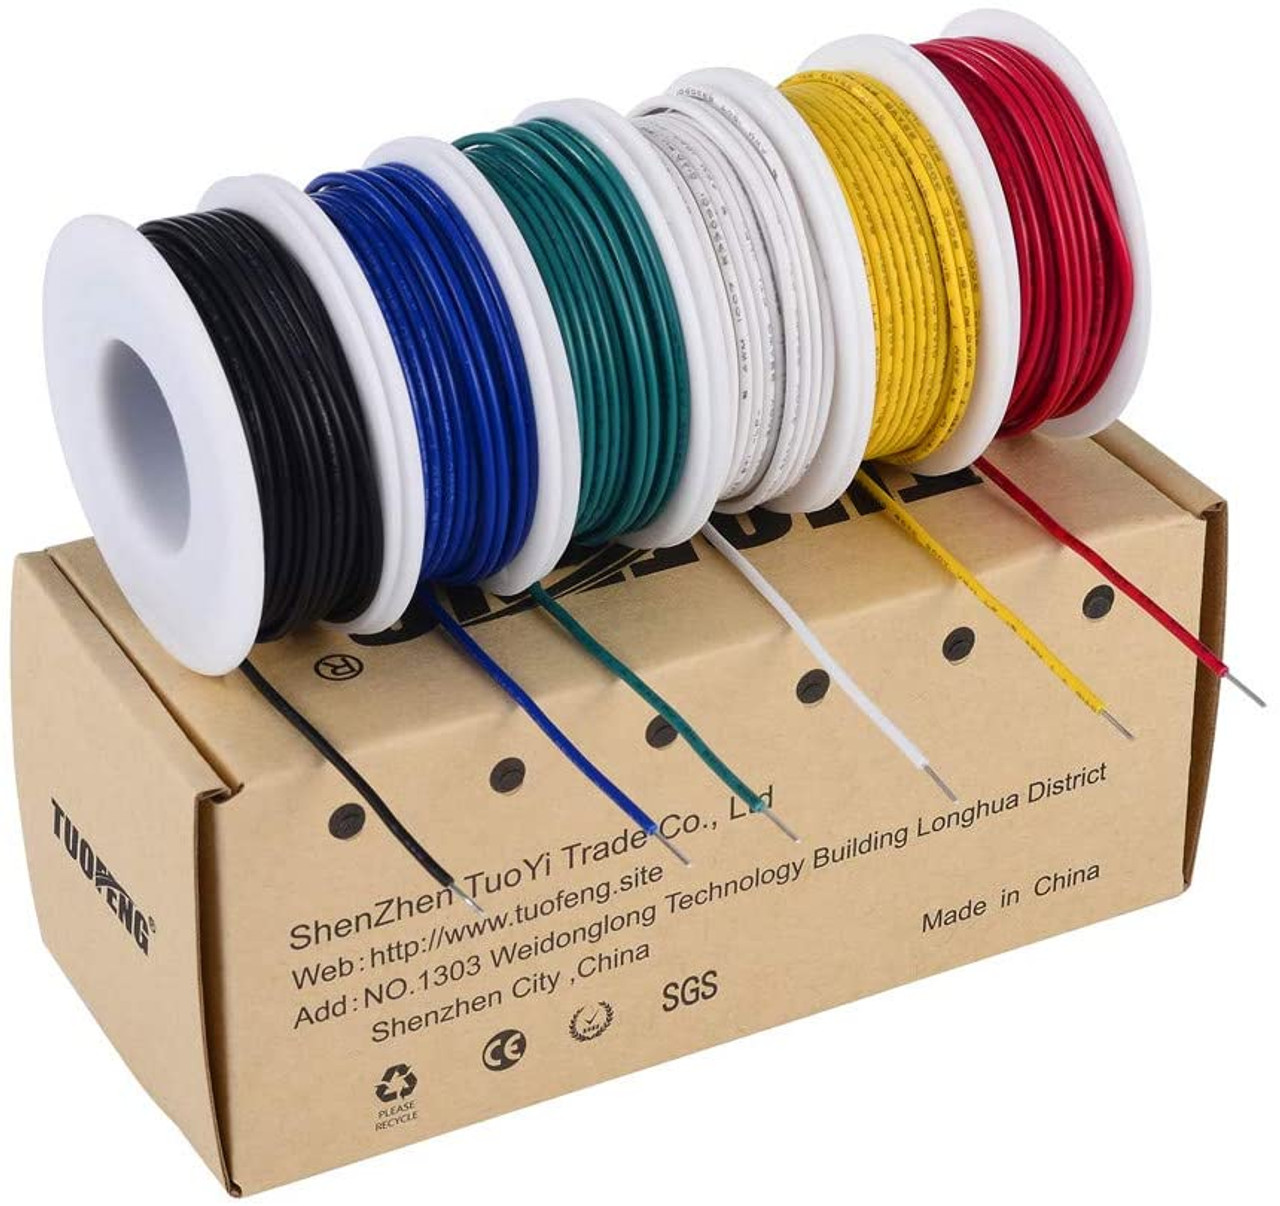 22 awg Solid Wire-Solid Wire Kit-6 different colored 30 Feet spools 22  gauge Jumper wire- Hook up Wire Kit